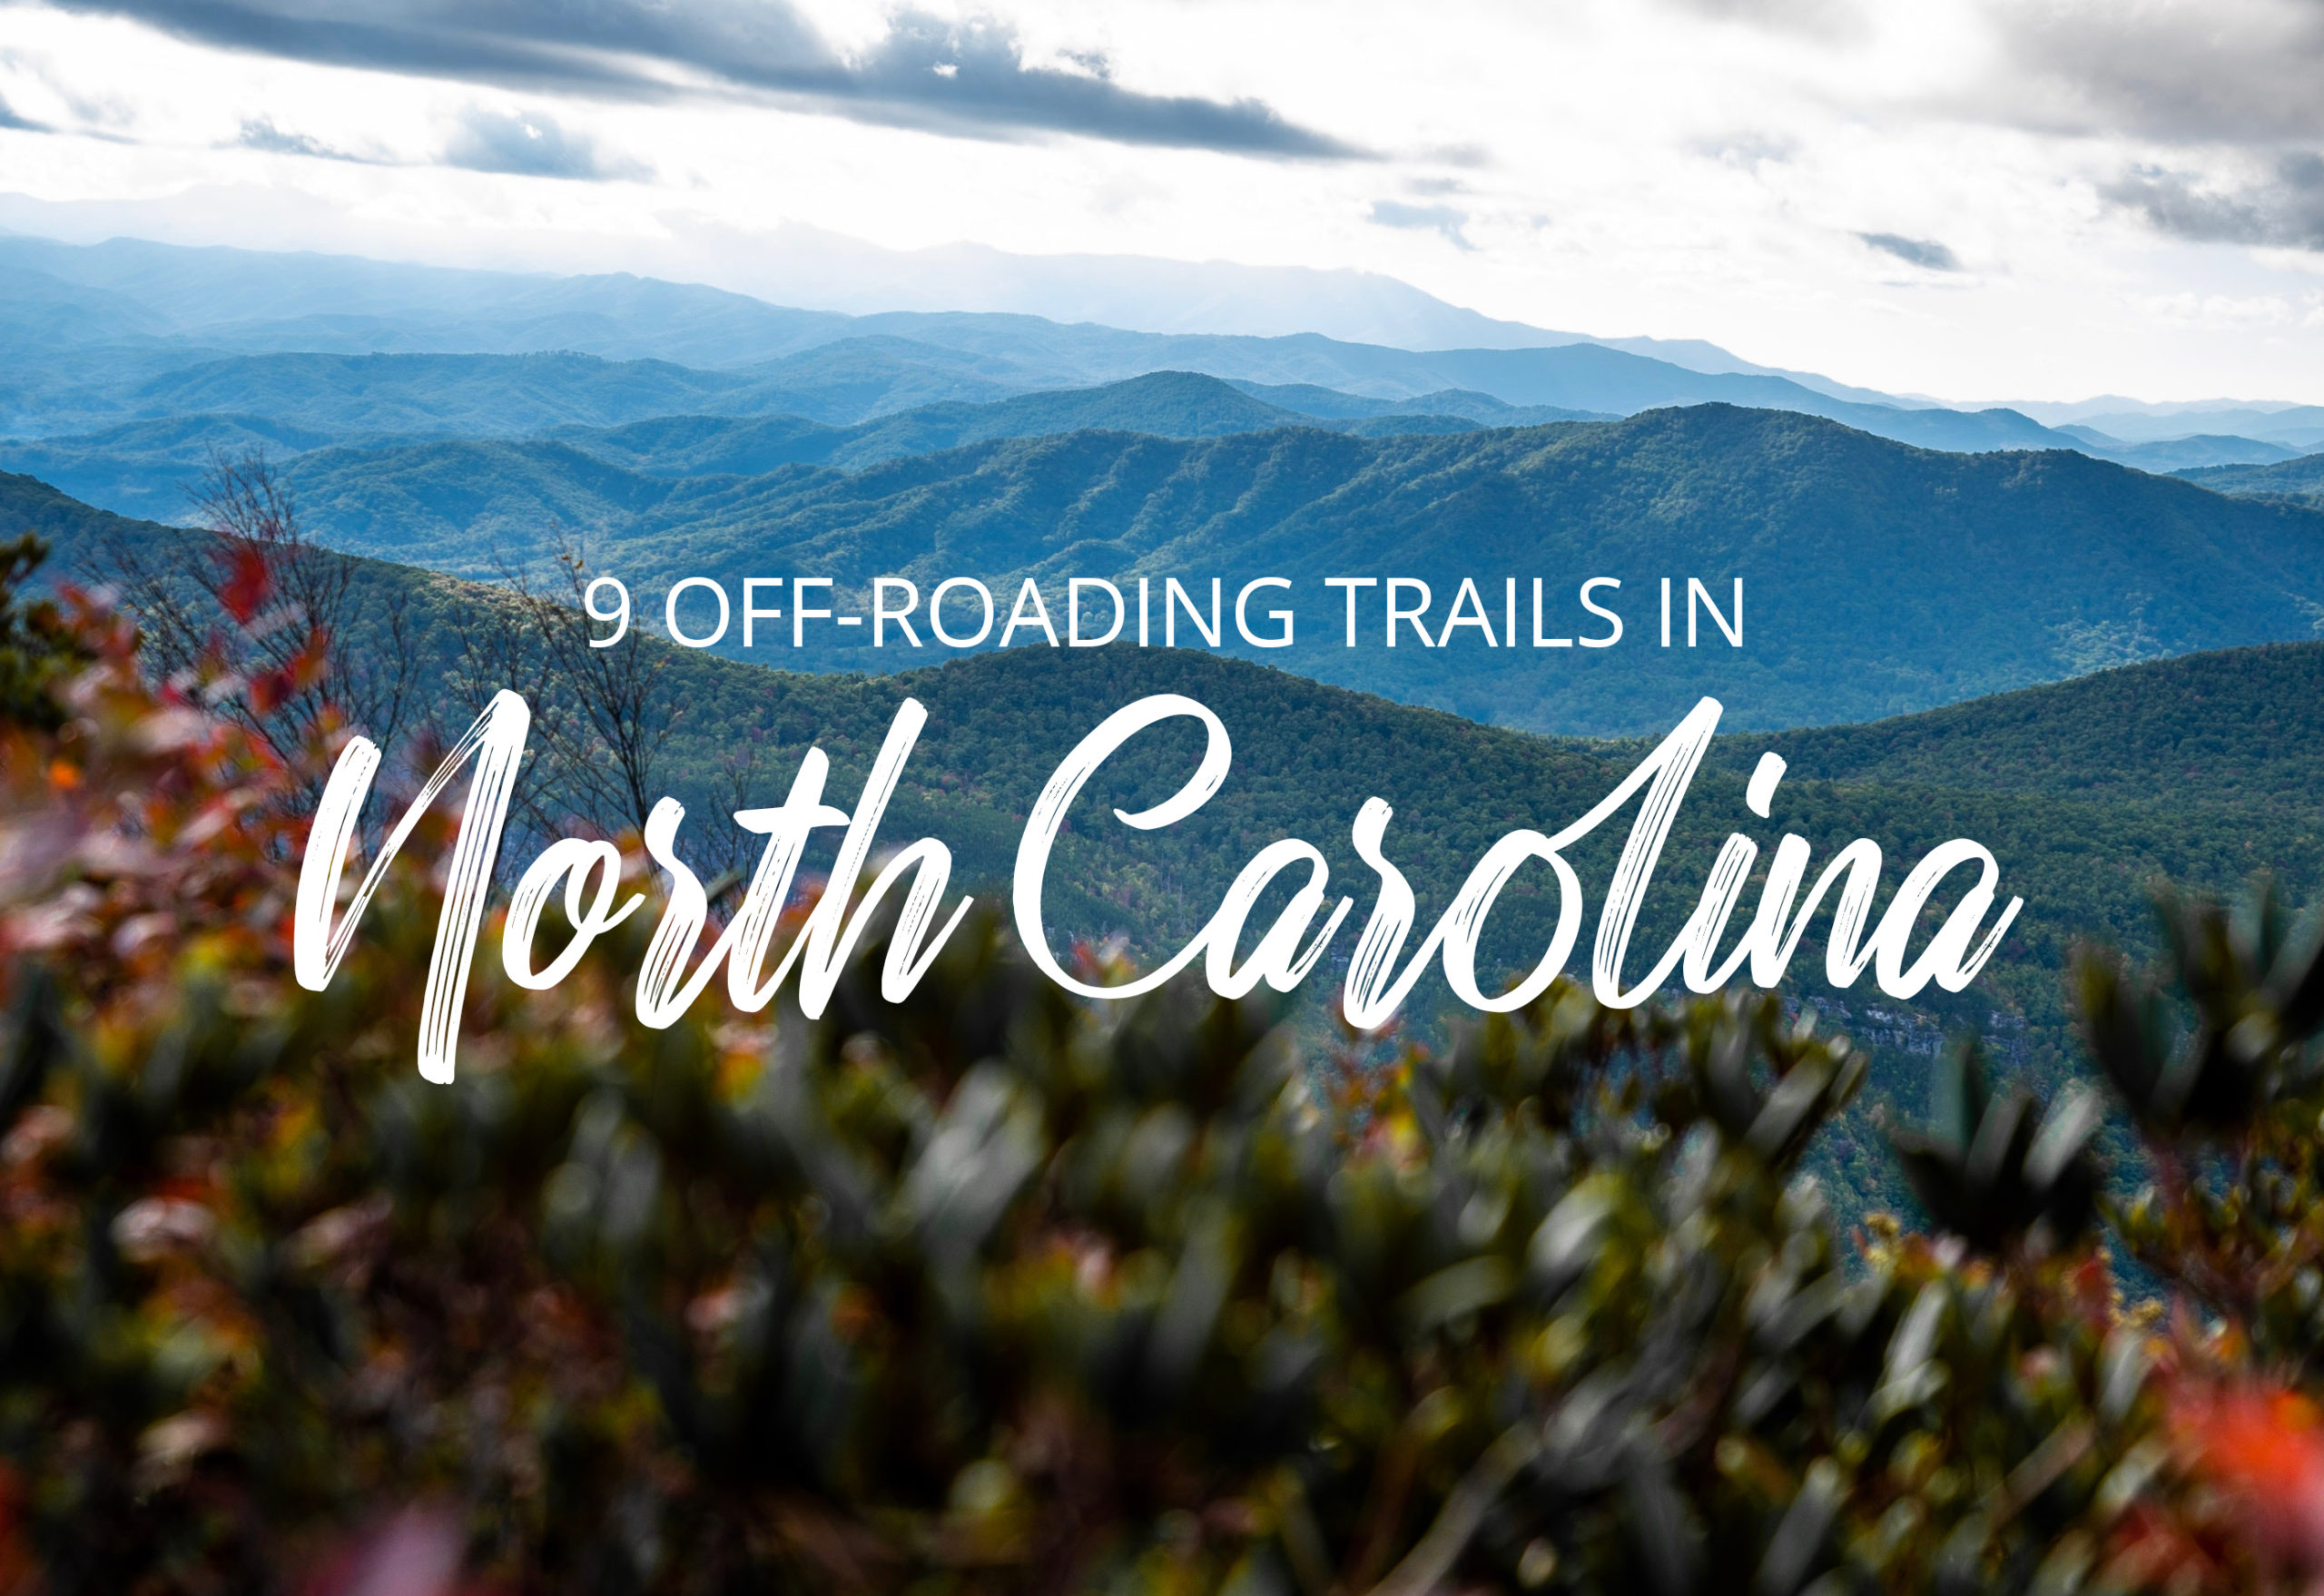 9 Off-Roading Trails in North Carolina - Tred Cred